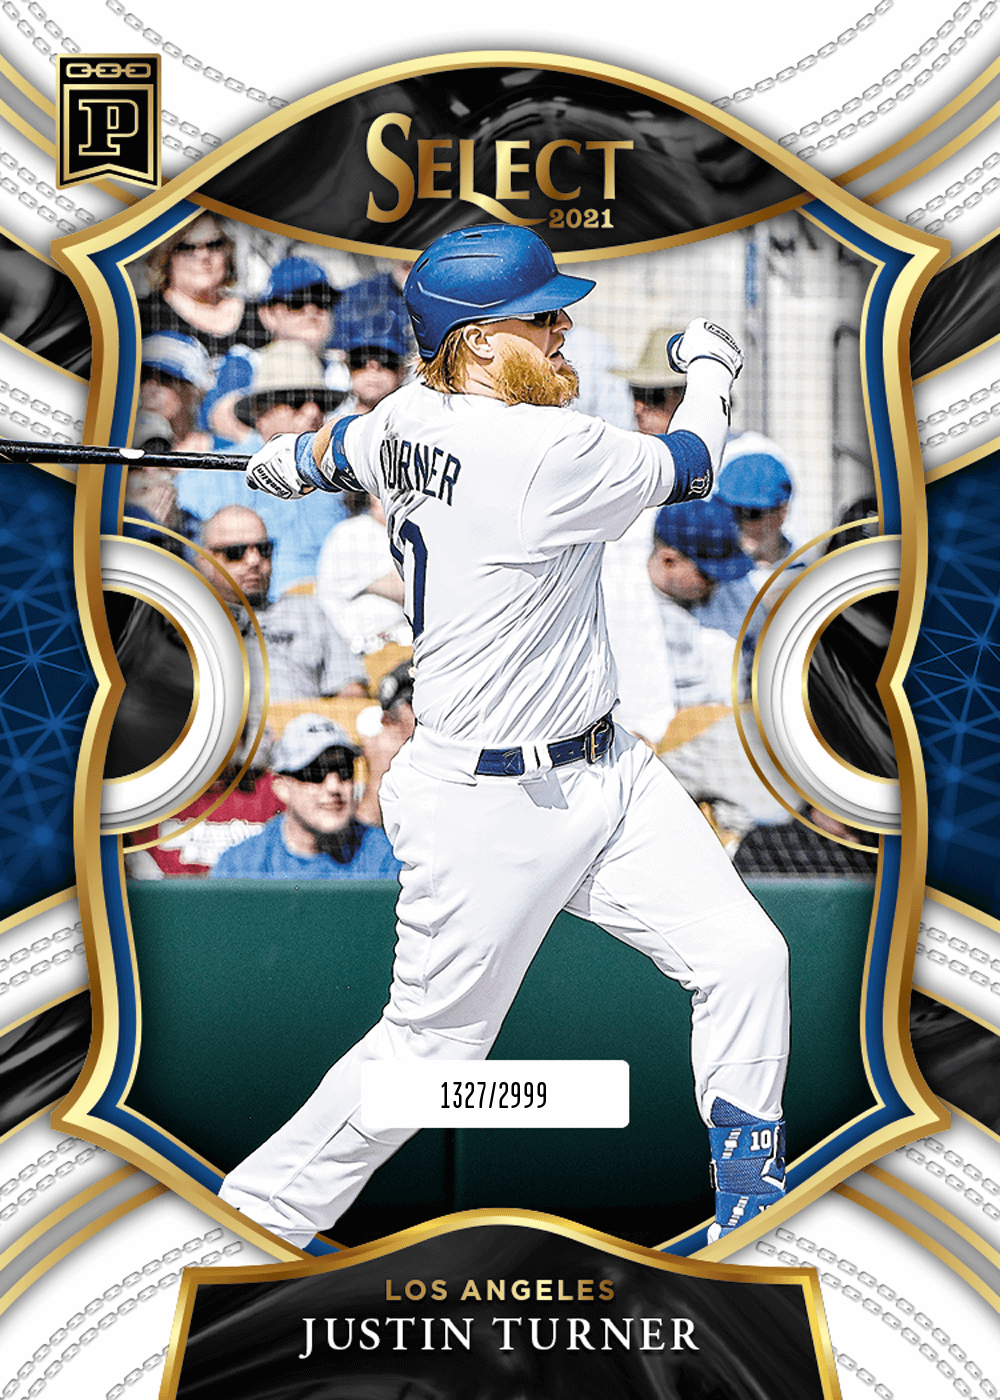 Justin Turner Trading Cards: Values, Tracking & Hot Deals